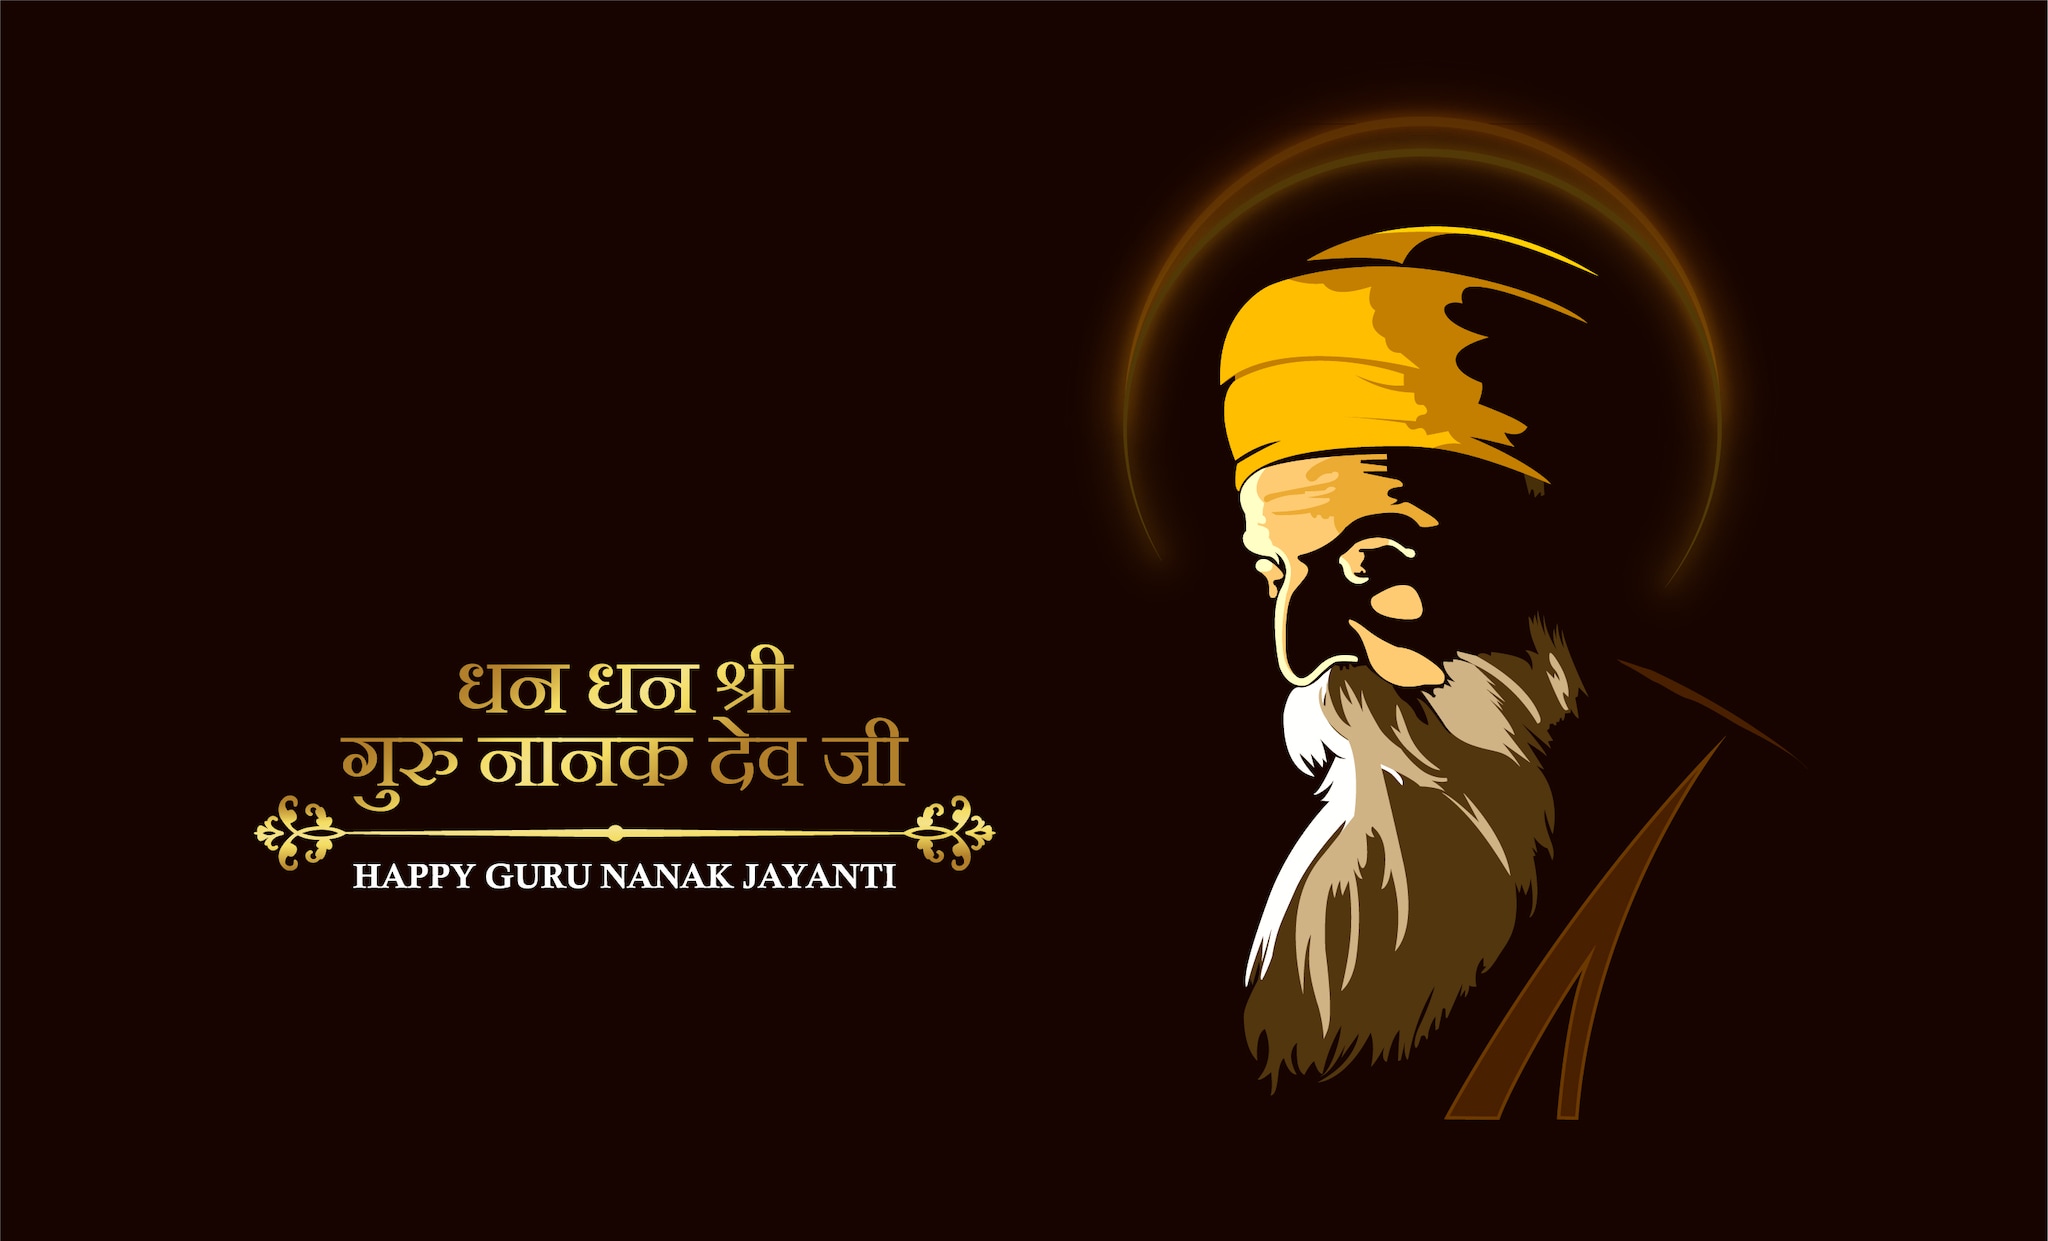 Happy Guru Nanak Jayanti 2021: Images, Quotes, Photos, Images, Facebook SMS & Wishes Messages.  (Image: Shutterstock)